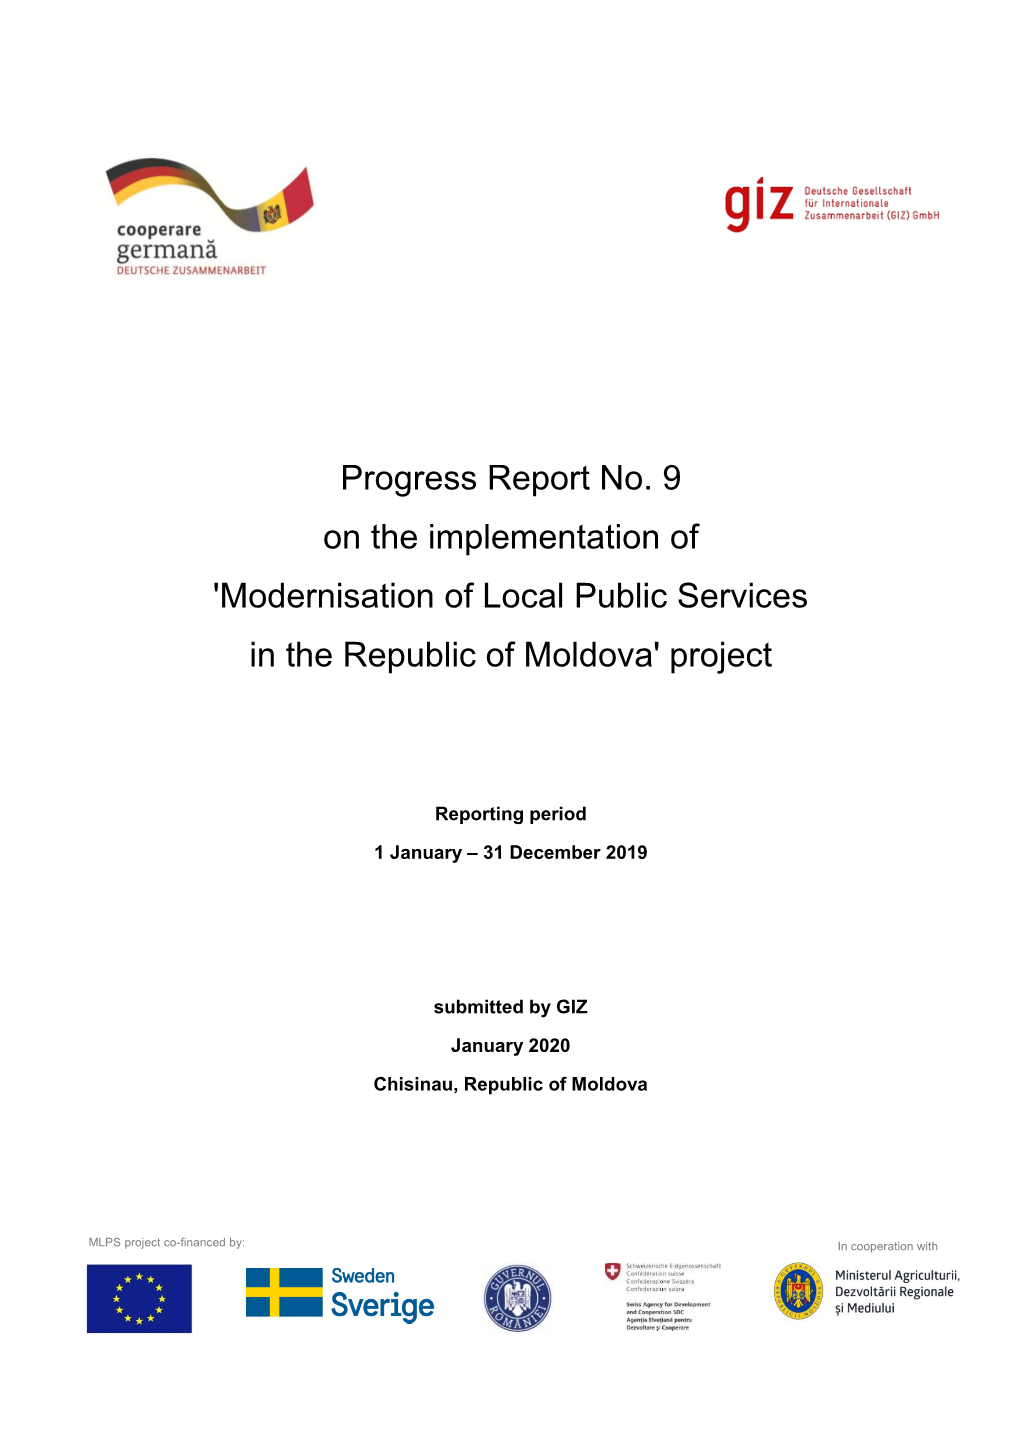 Progress Report No. 9 on the Implementation of 'Modernisation of Local Public Services in the Republic of Moldova' Project